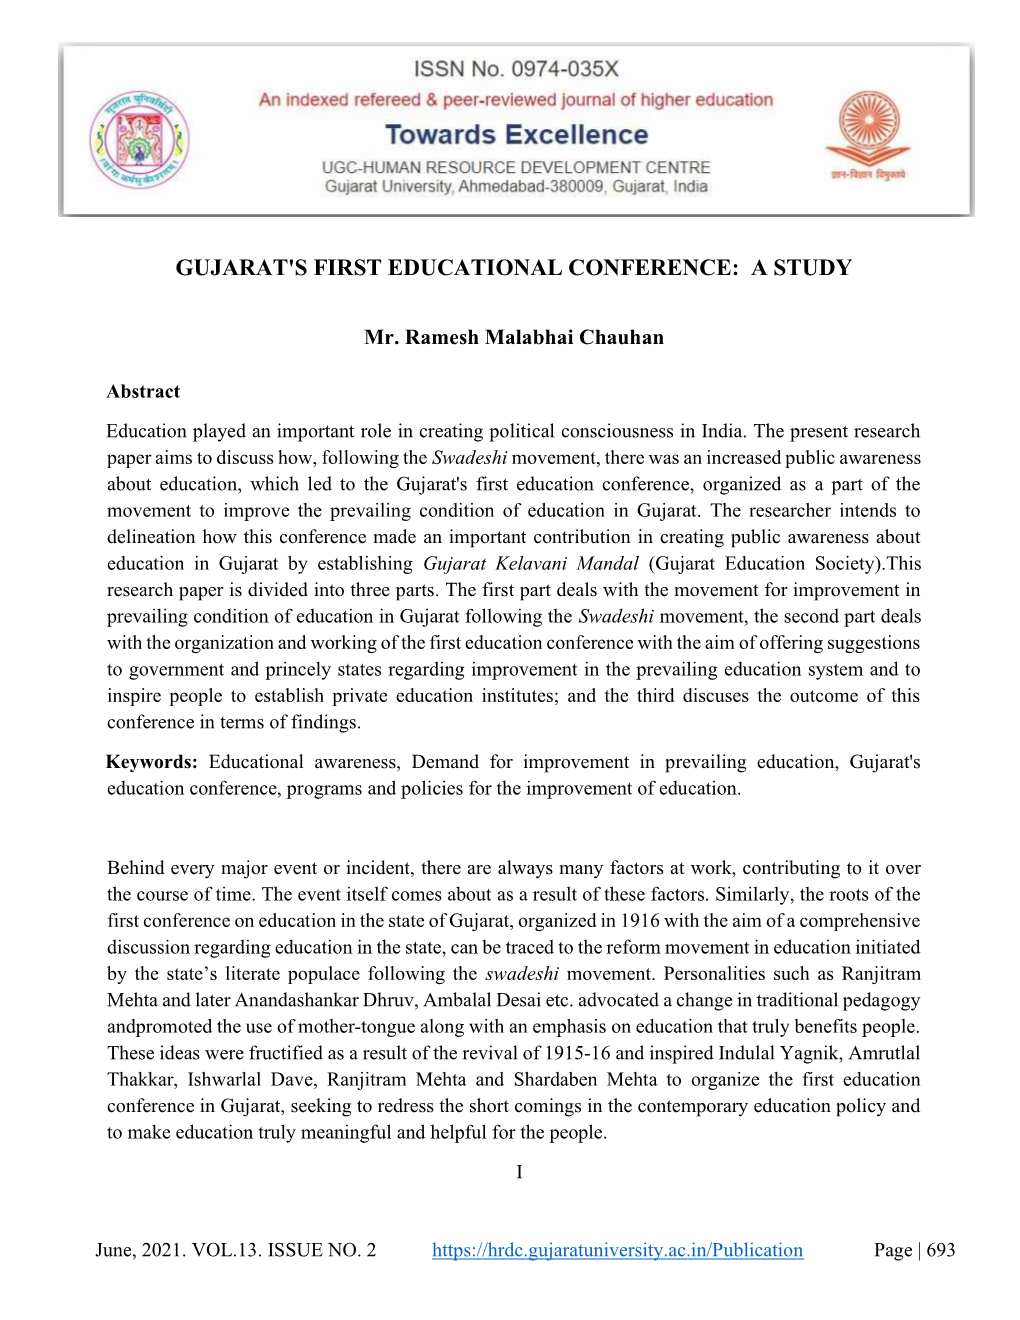 Gujarat's First Educational Conference: a Study